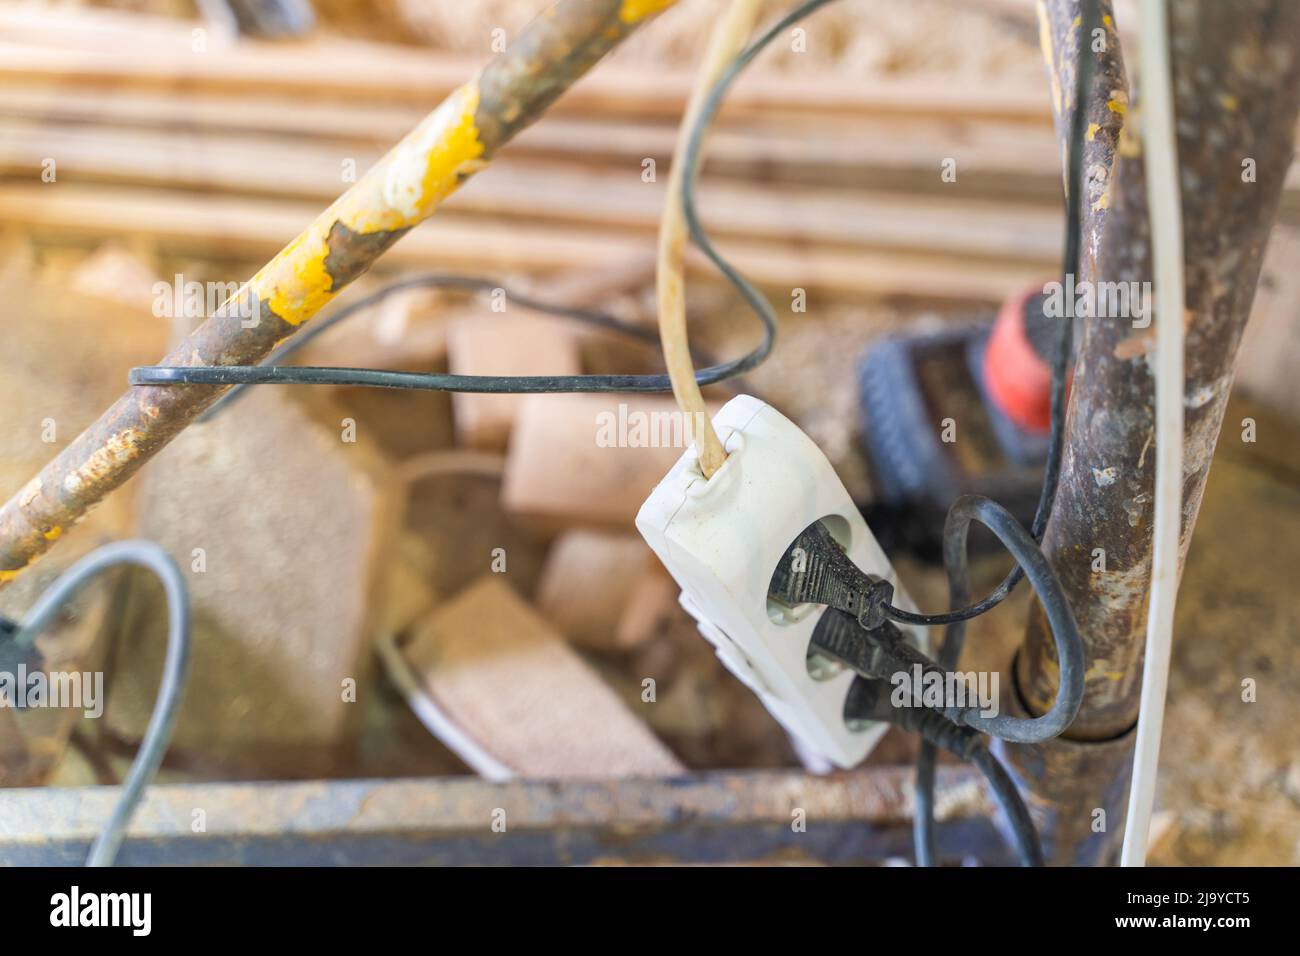 Power filter extension cord tee with euro sockets hanging on scaffolding with three connected electrical appliances, close-up Stock Photo